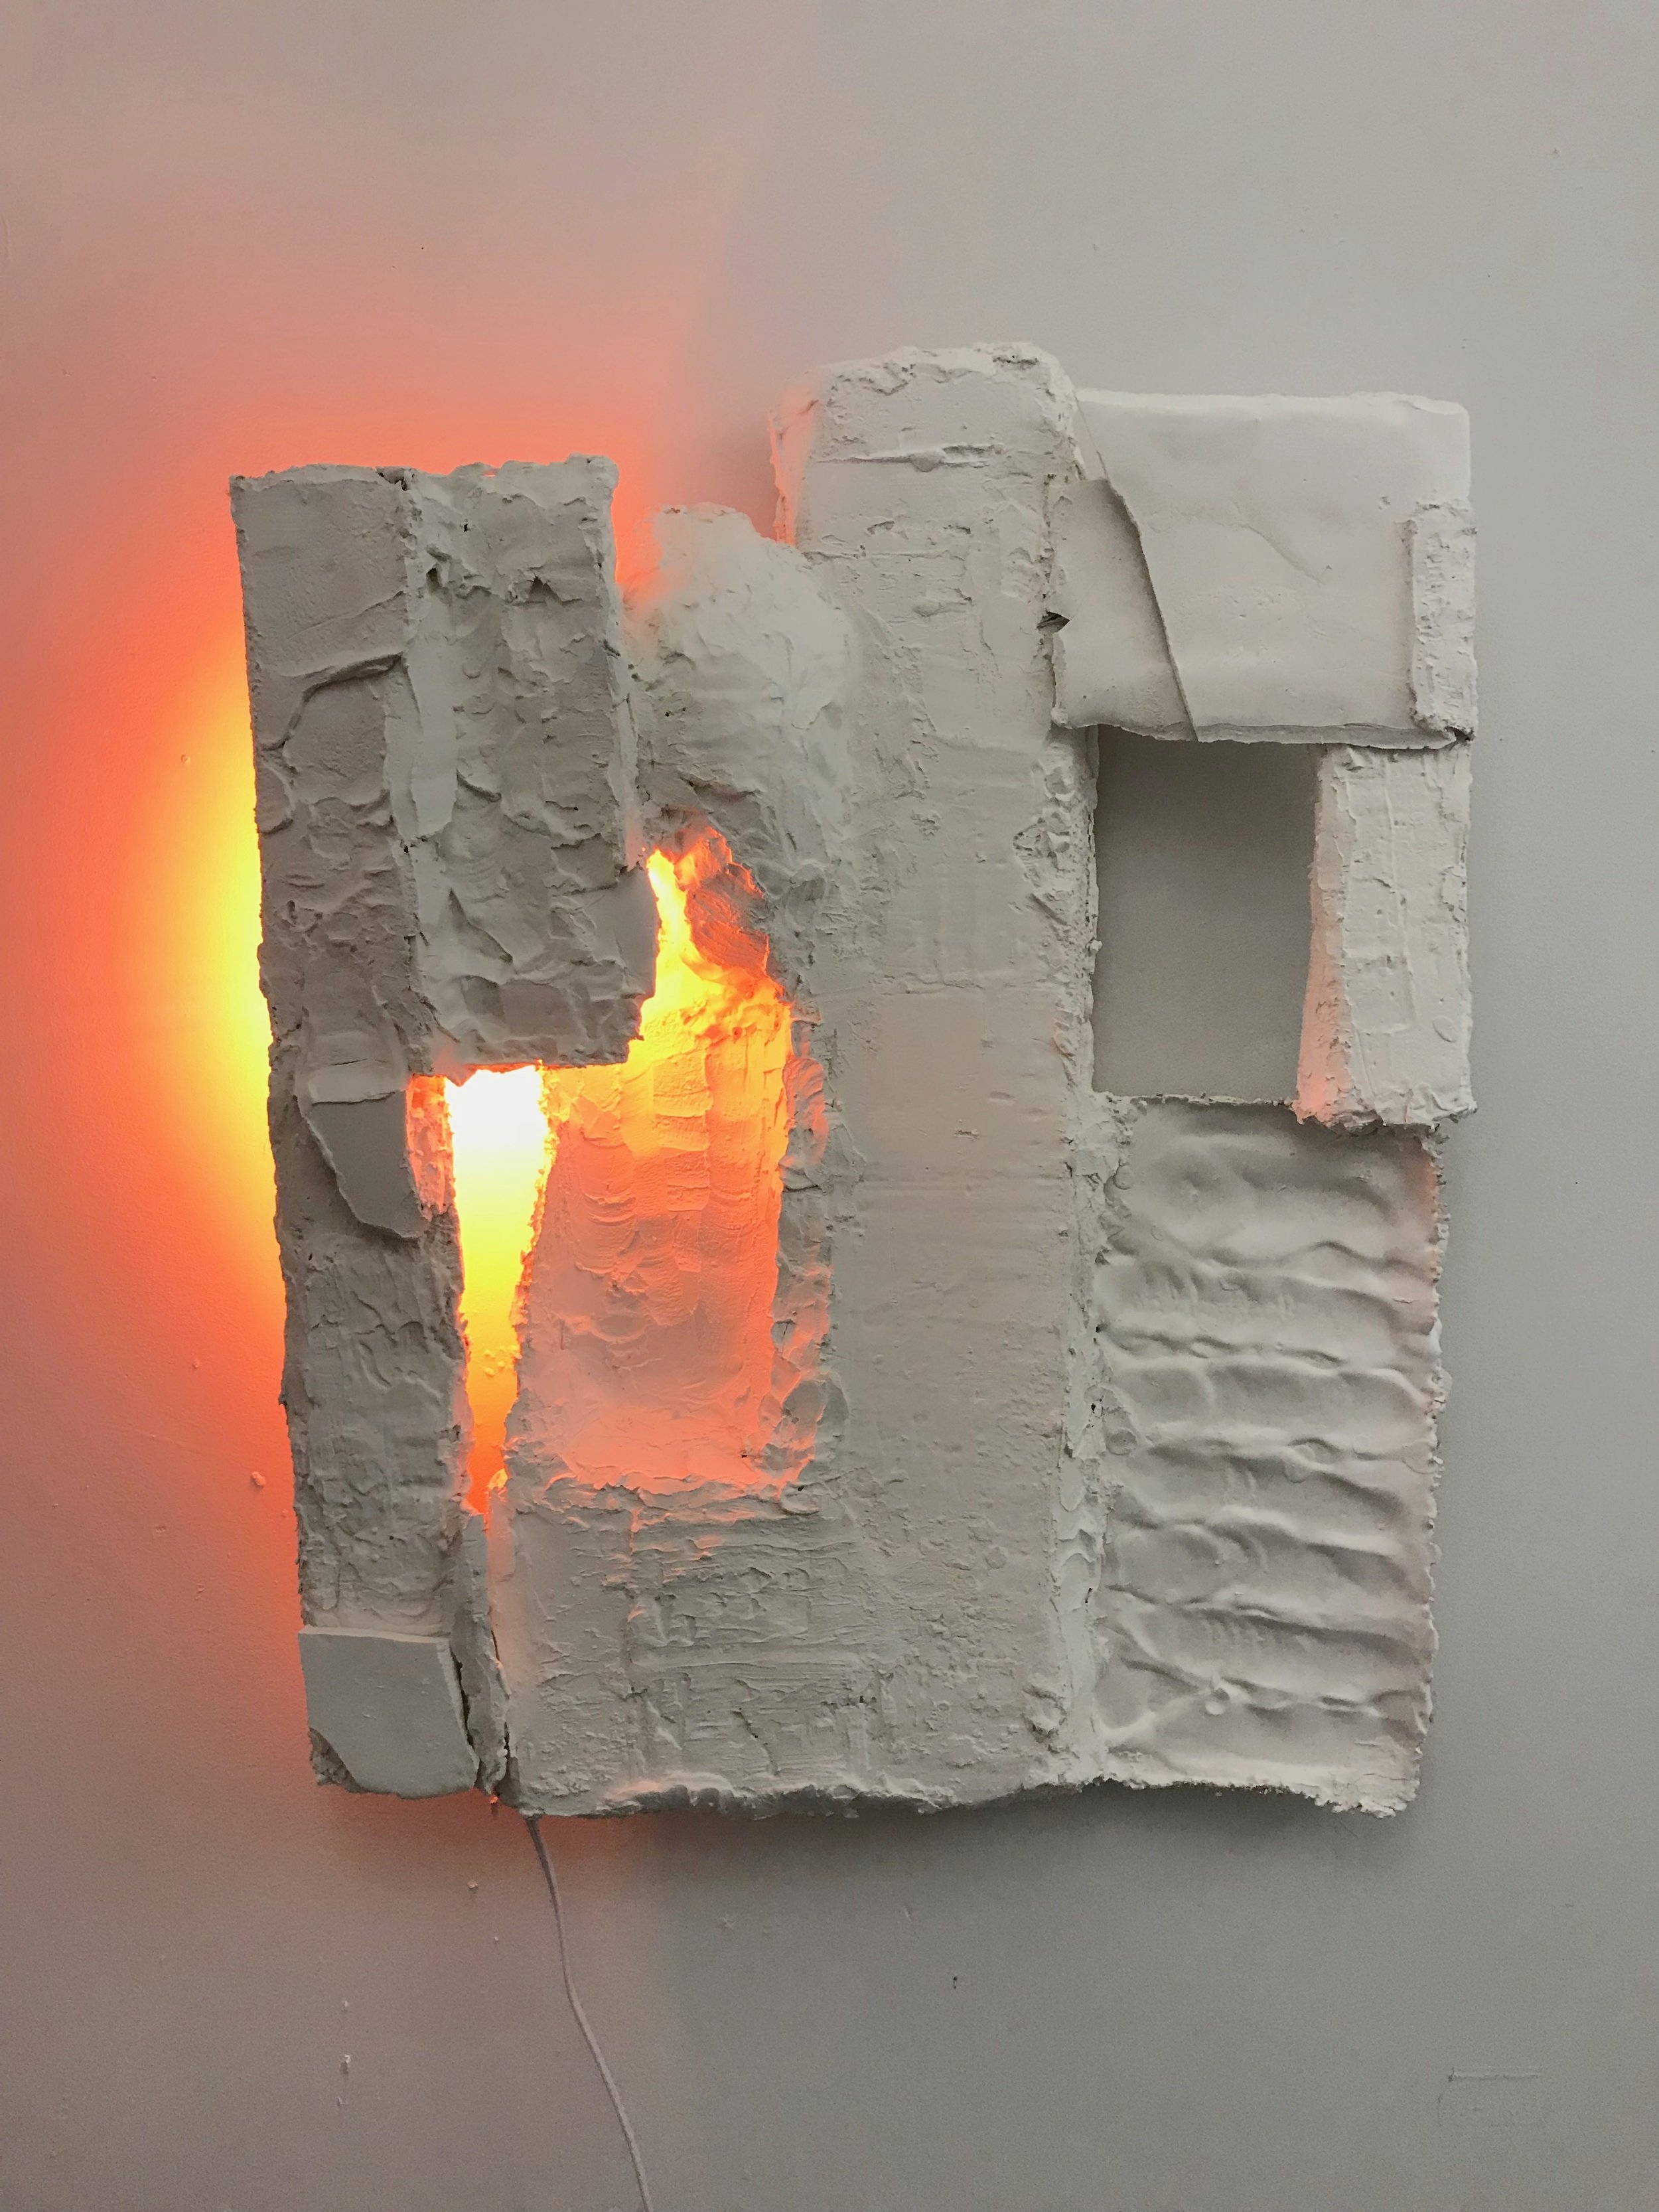 She Didn't Think It Showed Really, 2017. Plaster, burlap, lightbulb. (wall hanging) As seen in  COLORSCULPTURE exhibit in DUMBO Brooklyn, NY, 2017.